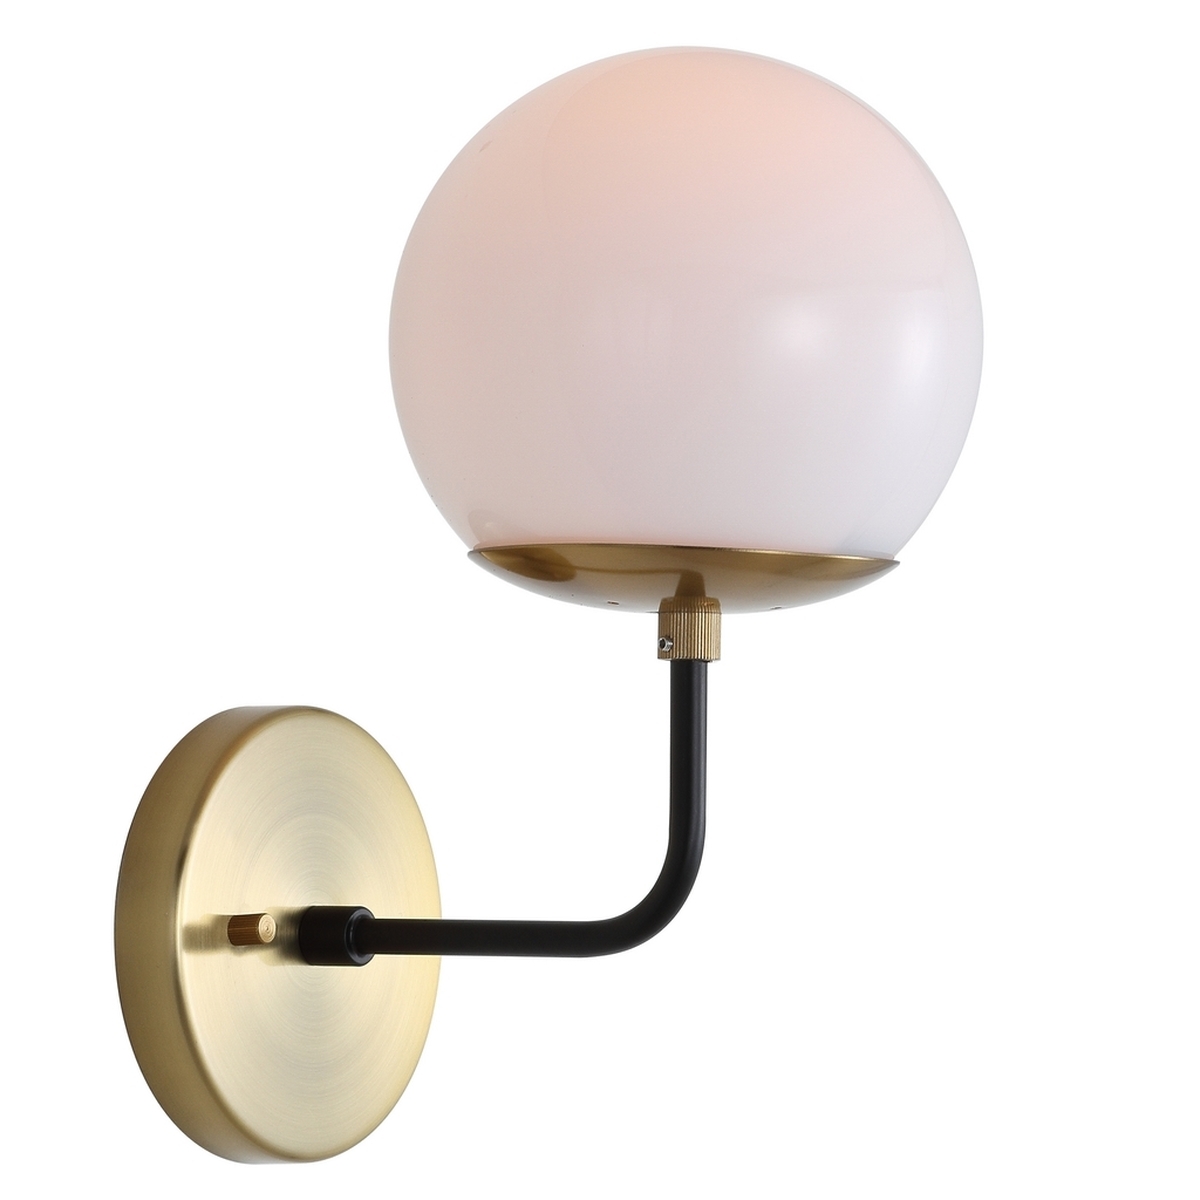 Cayden Wall Sconce - Brass - Arlo Home - Image 1